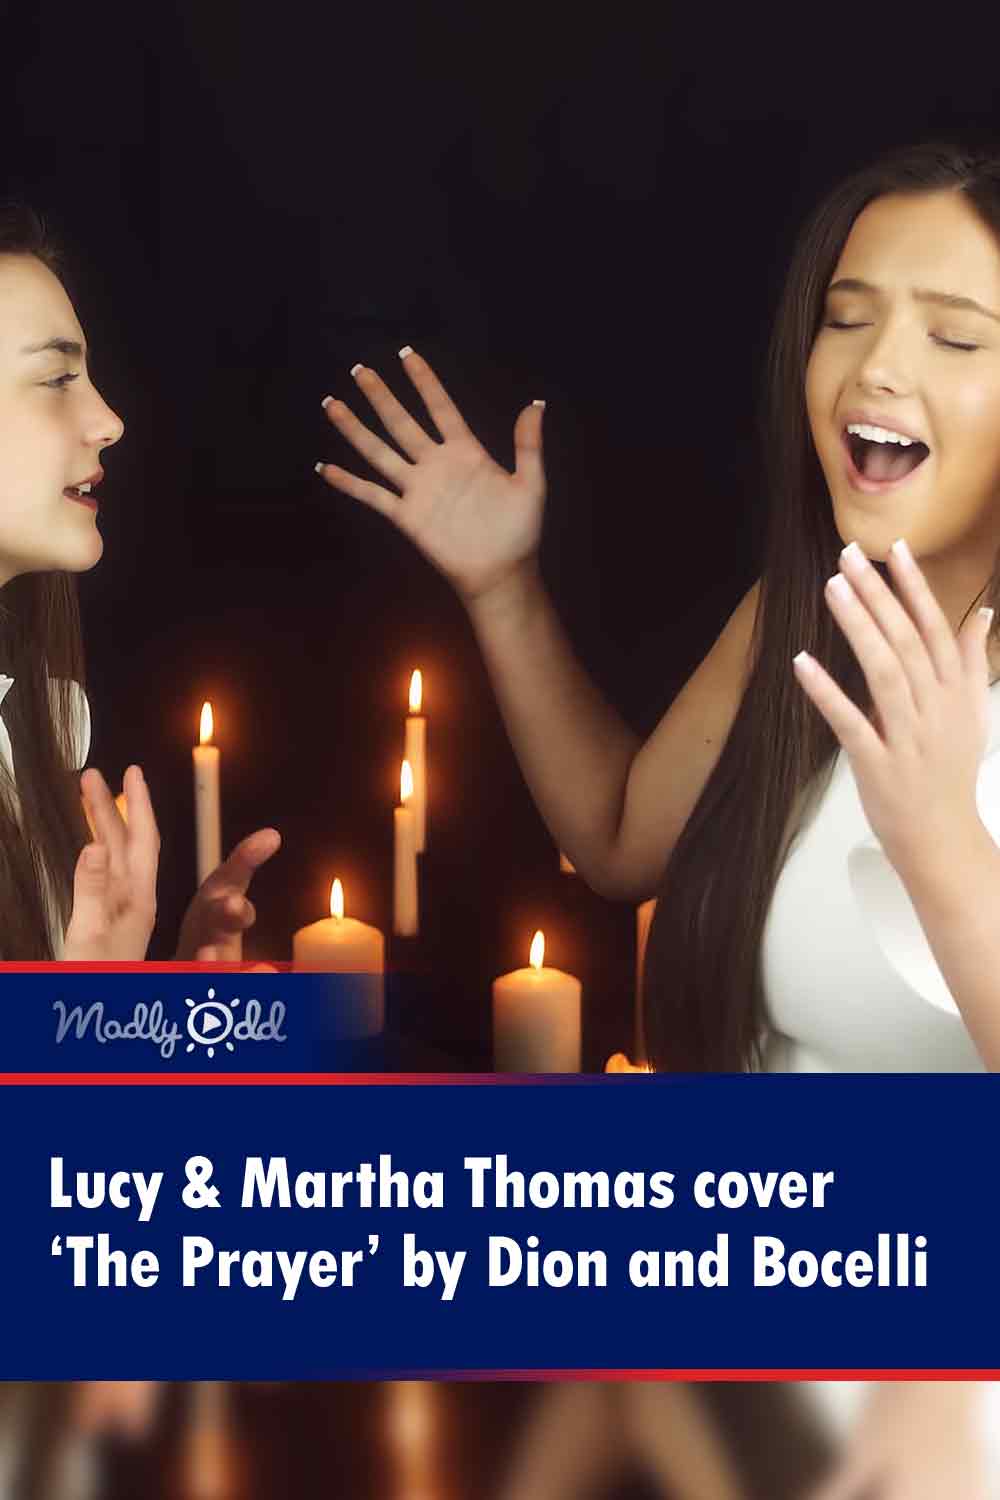 Lucy & Martha Thomas cover ‘The Prayer’ by Dion and Bocelli